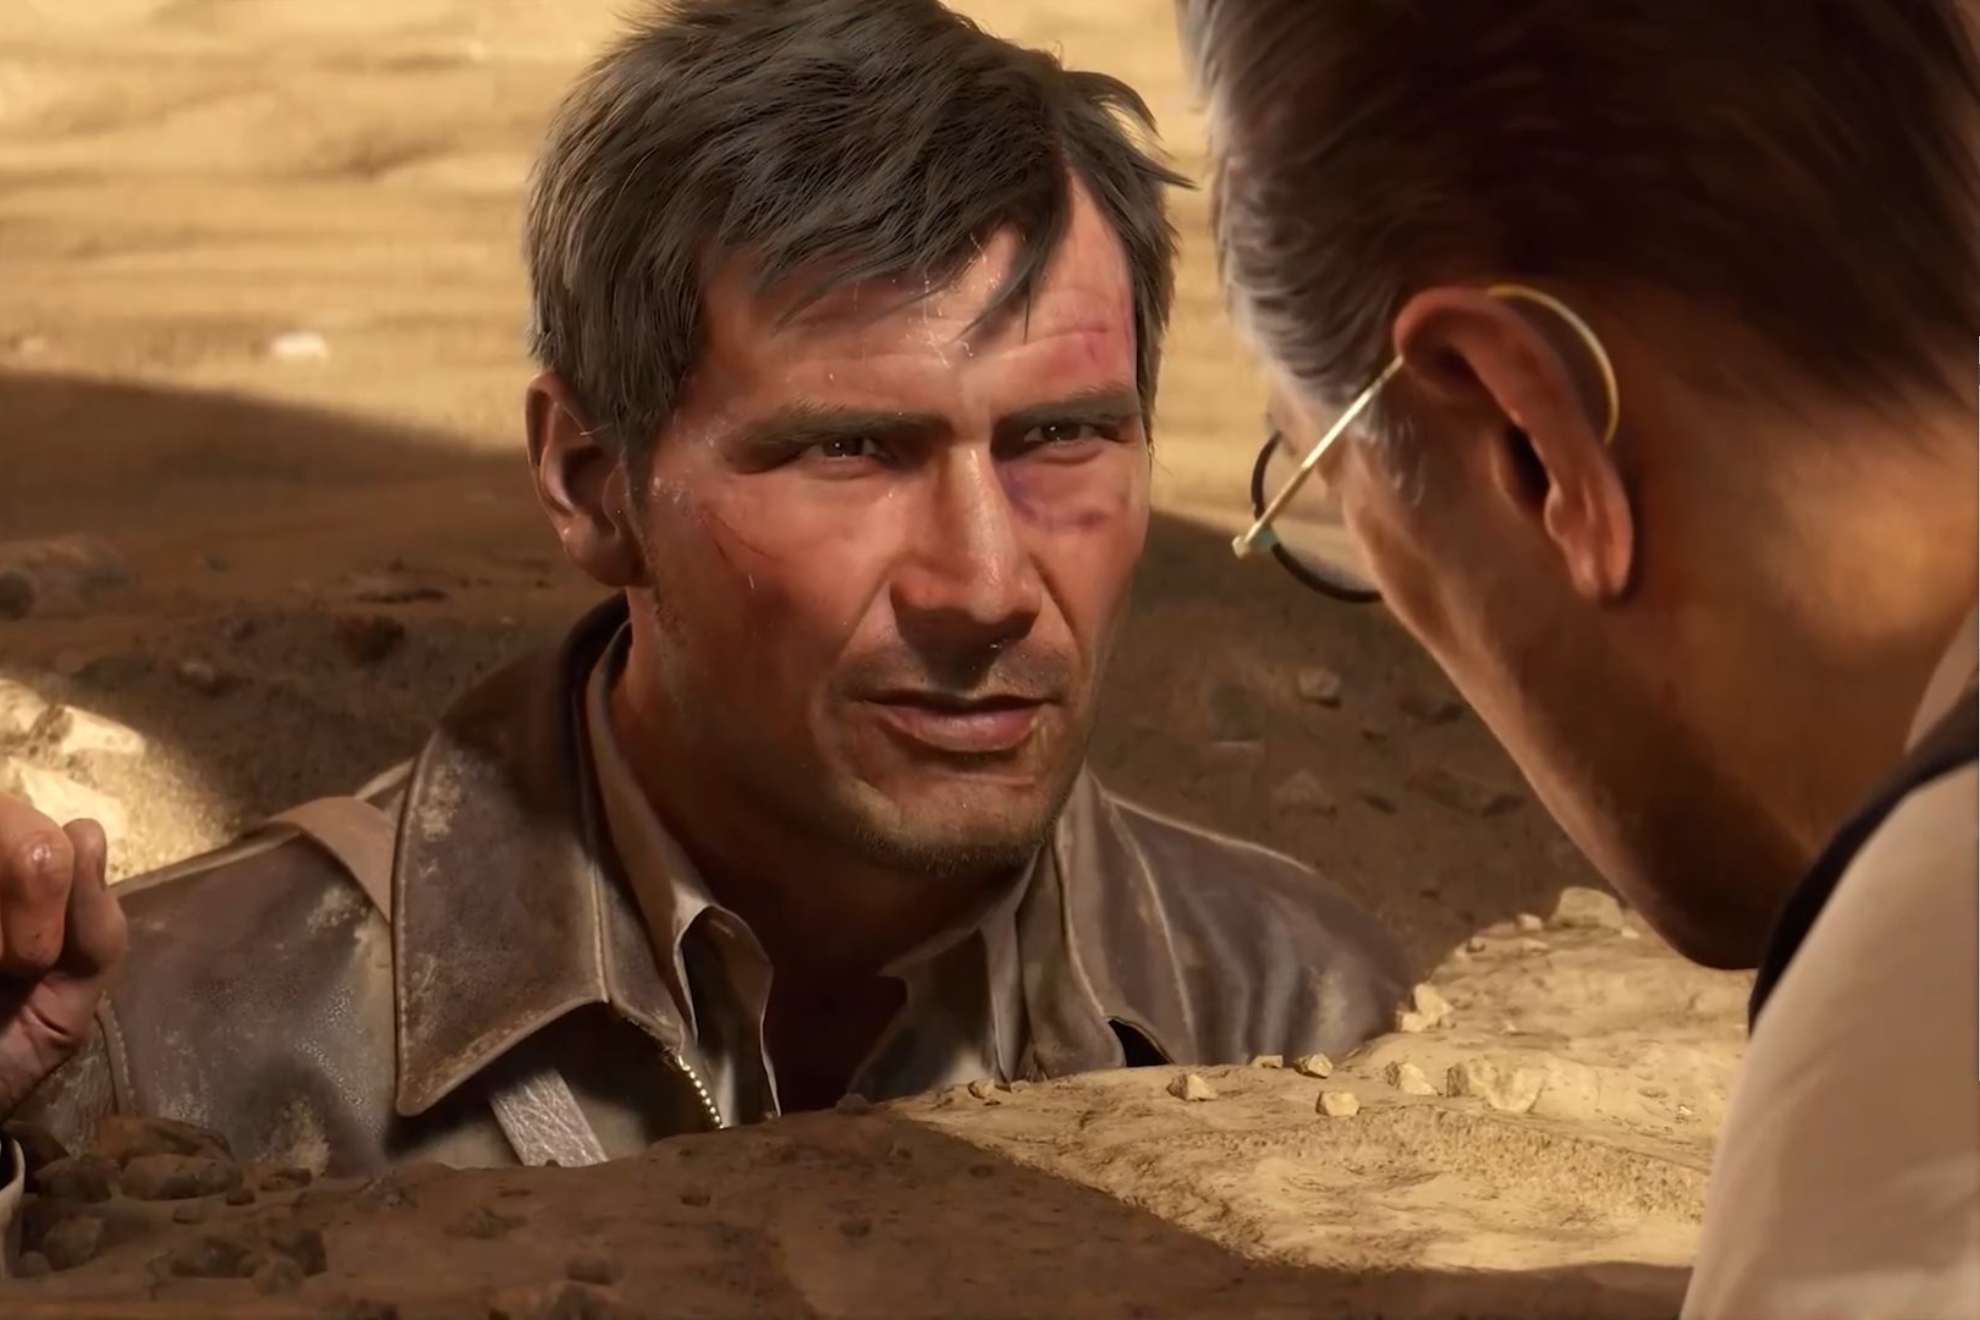 Indiana Jones in the video game looks exactly like Harrison Ford.